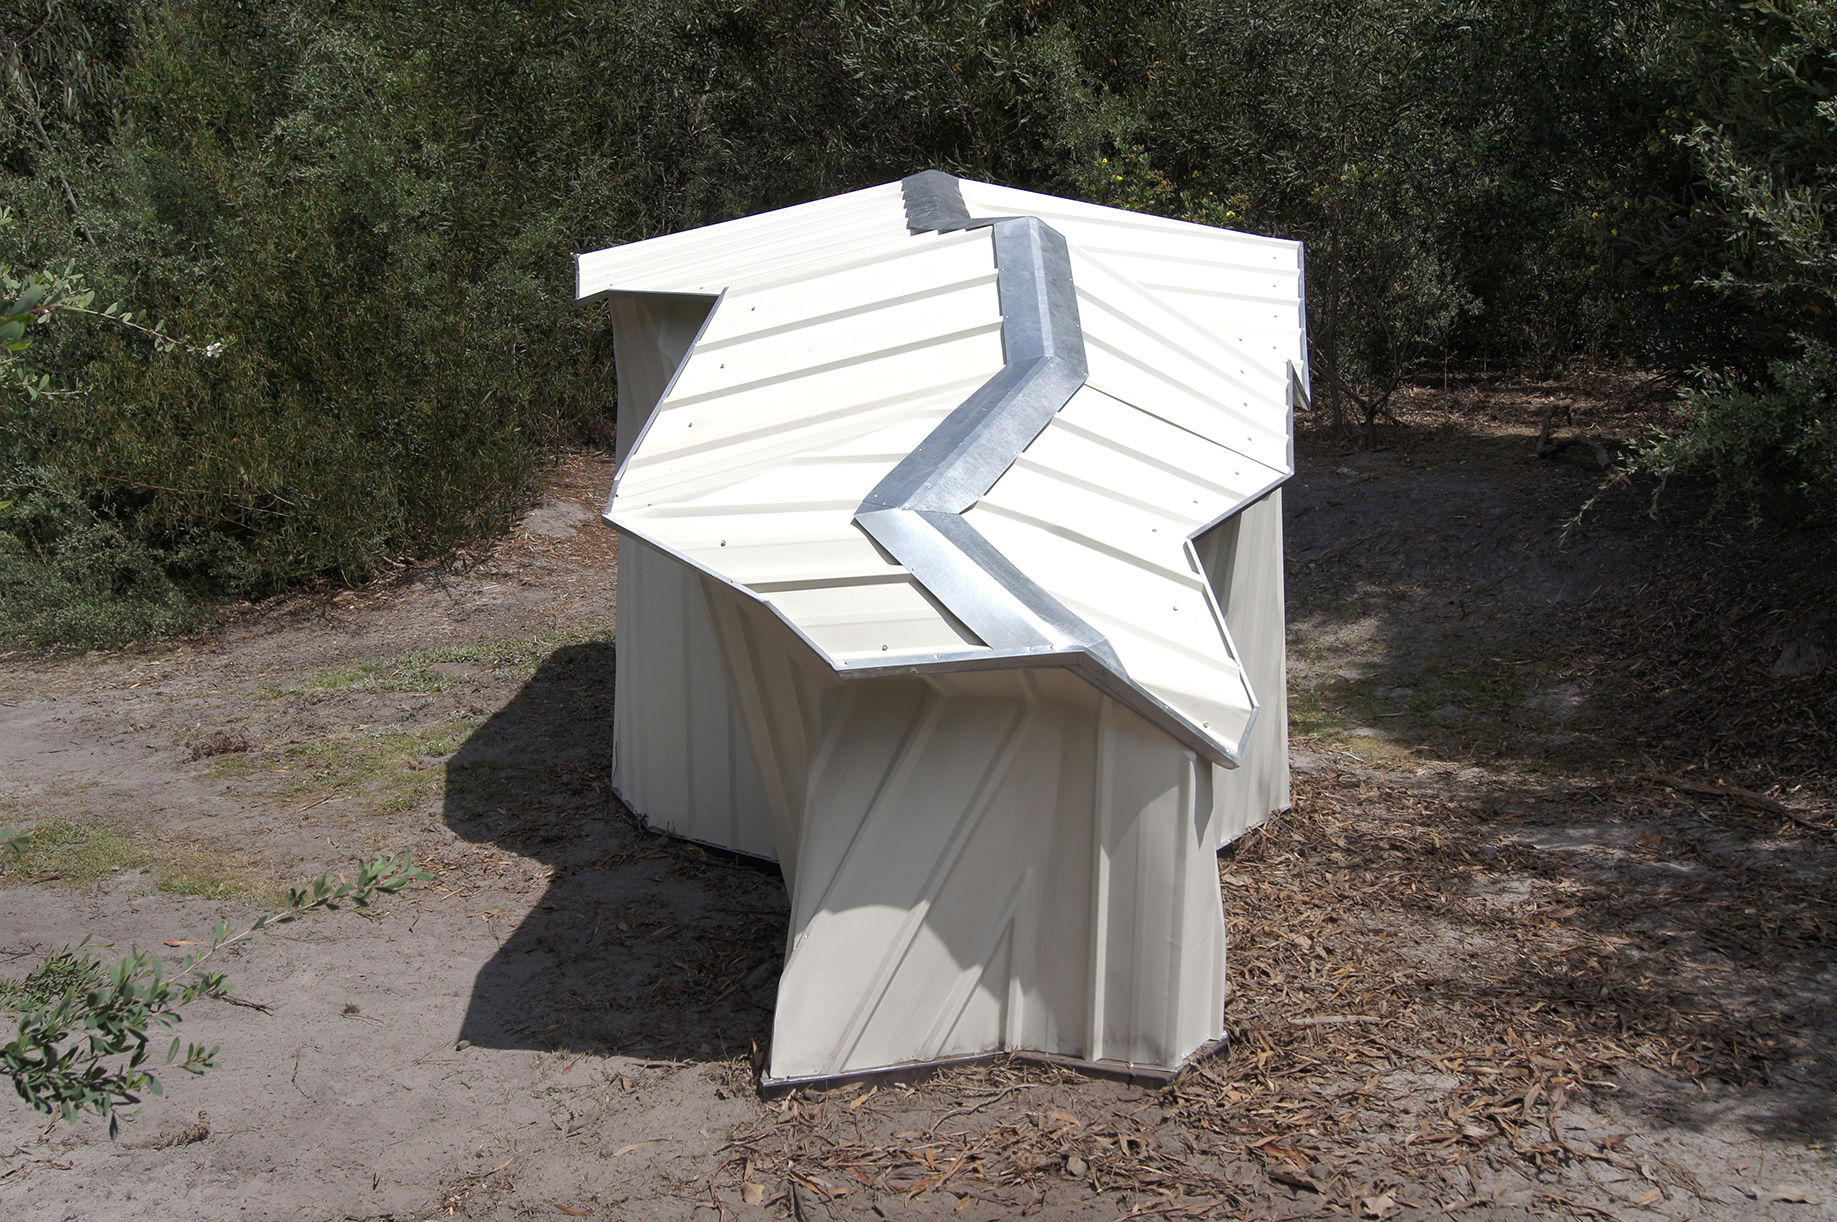   A Room for Things , 2014 Steel Chief Colourbond shed, steel, paint, polyester resin 212 x 510 x 227cm   Mc Clelland Survey &amp; Award 2014 (Finalist)  